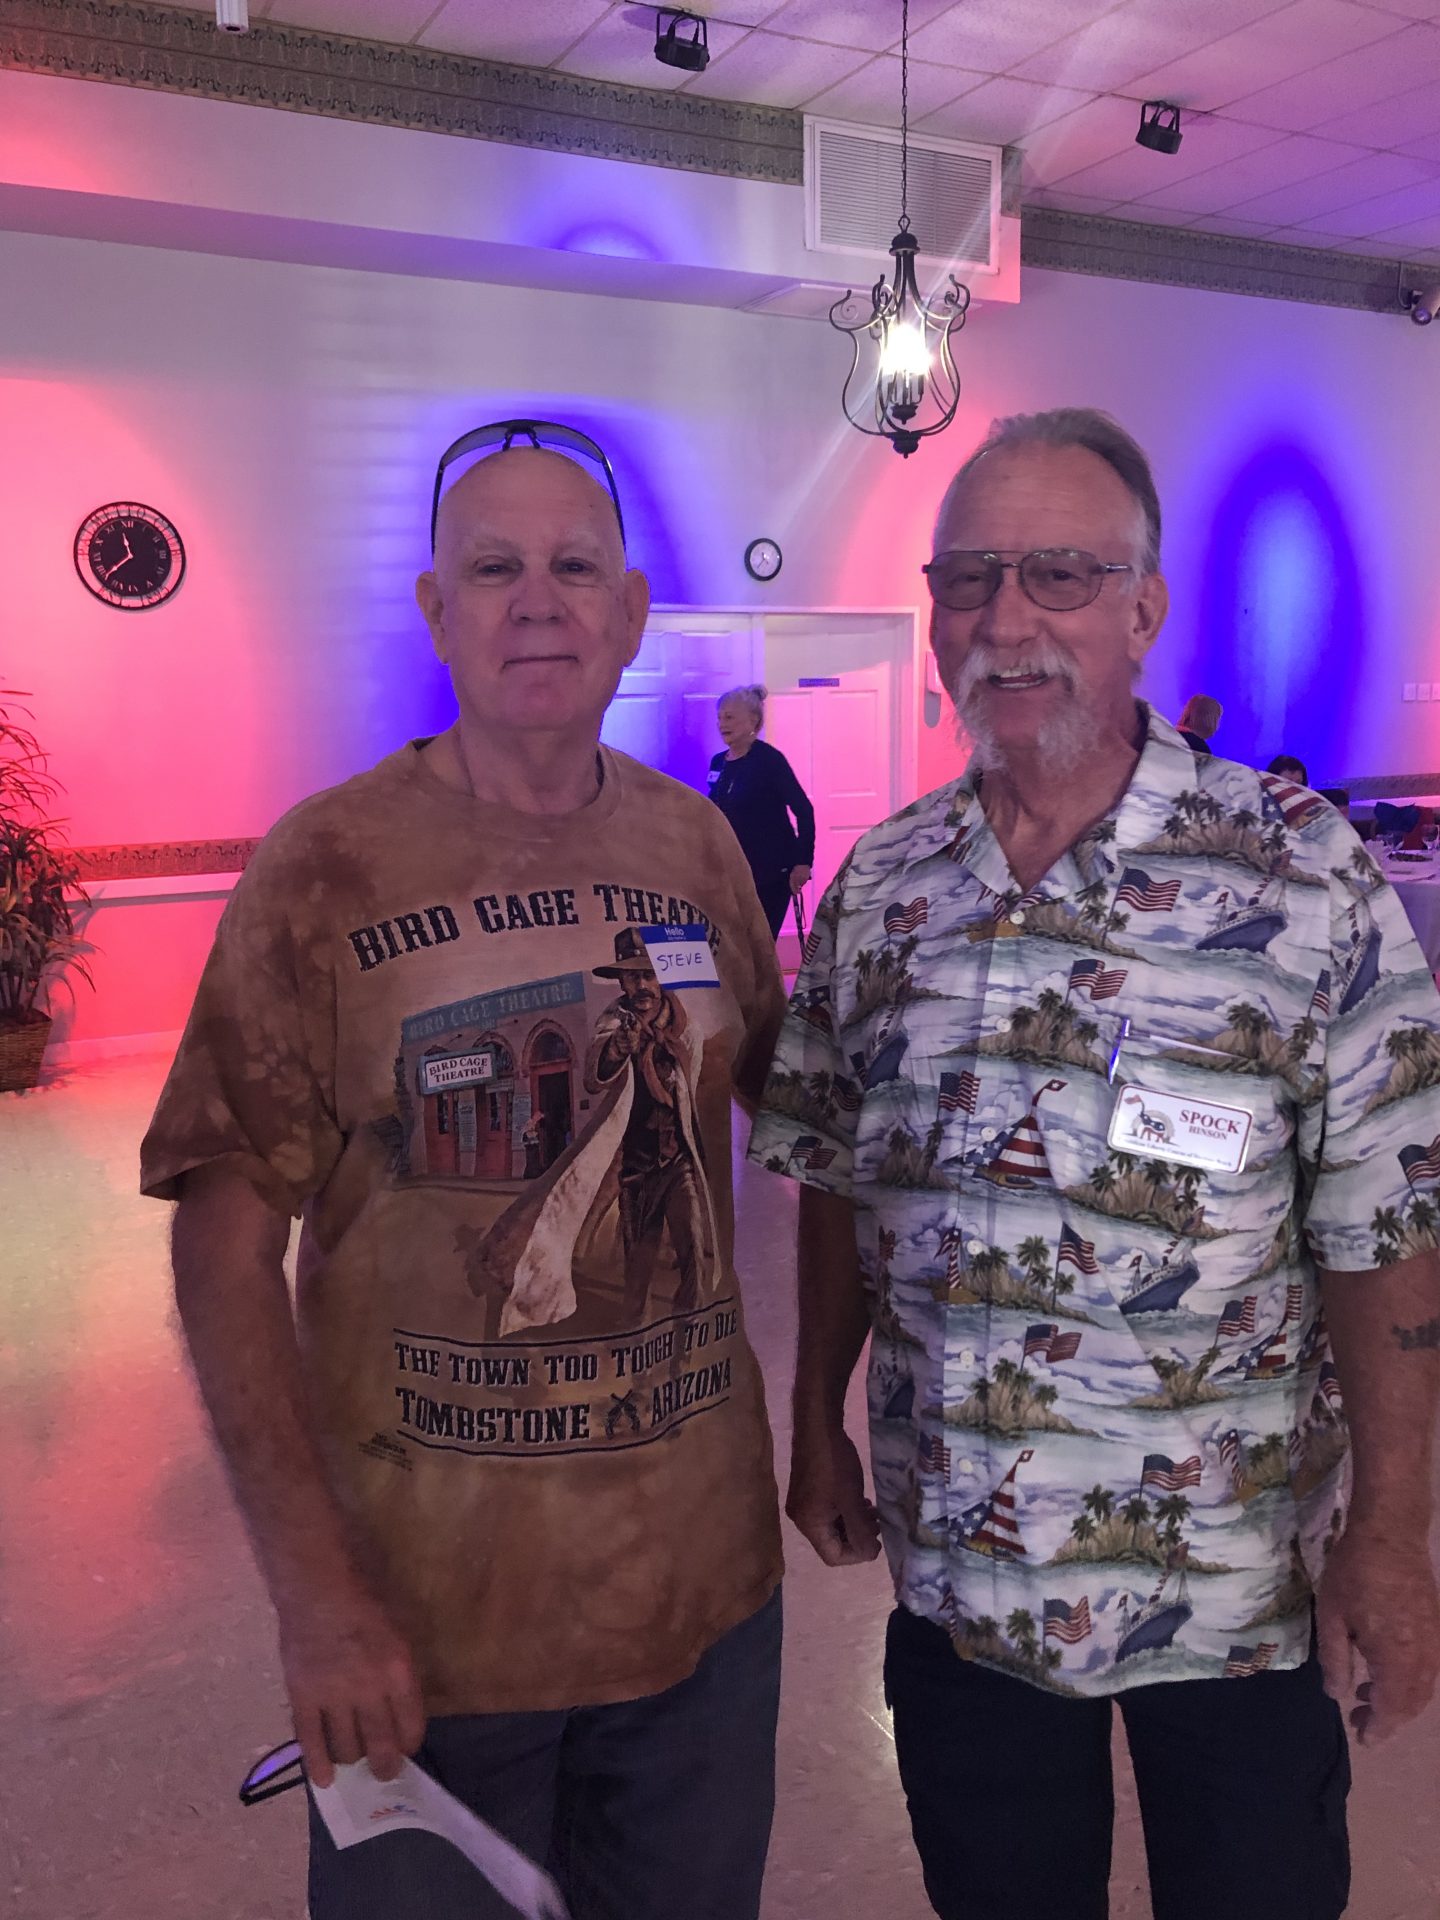 Steve was an awesome friend and a man's man. Steve came to the Republican Liberty Caucus luncheon in Daytona in July and we had a good time. I feel really fortunate to have gotten to spend some time with him.